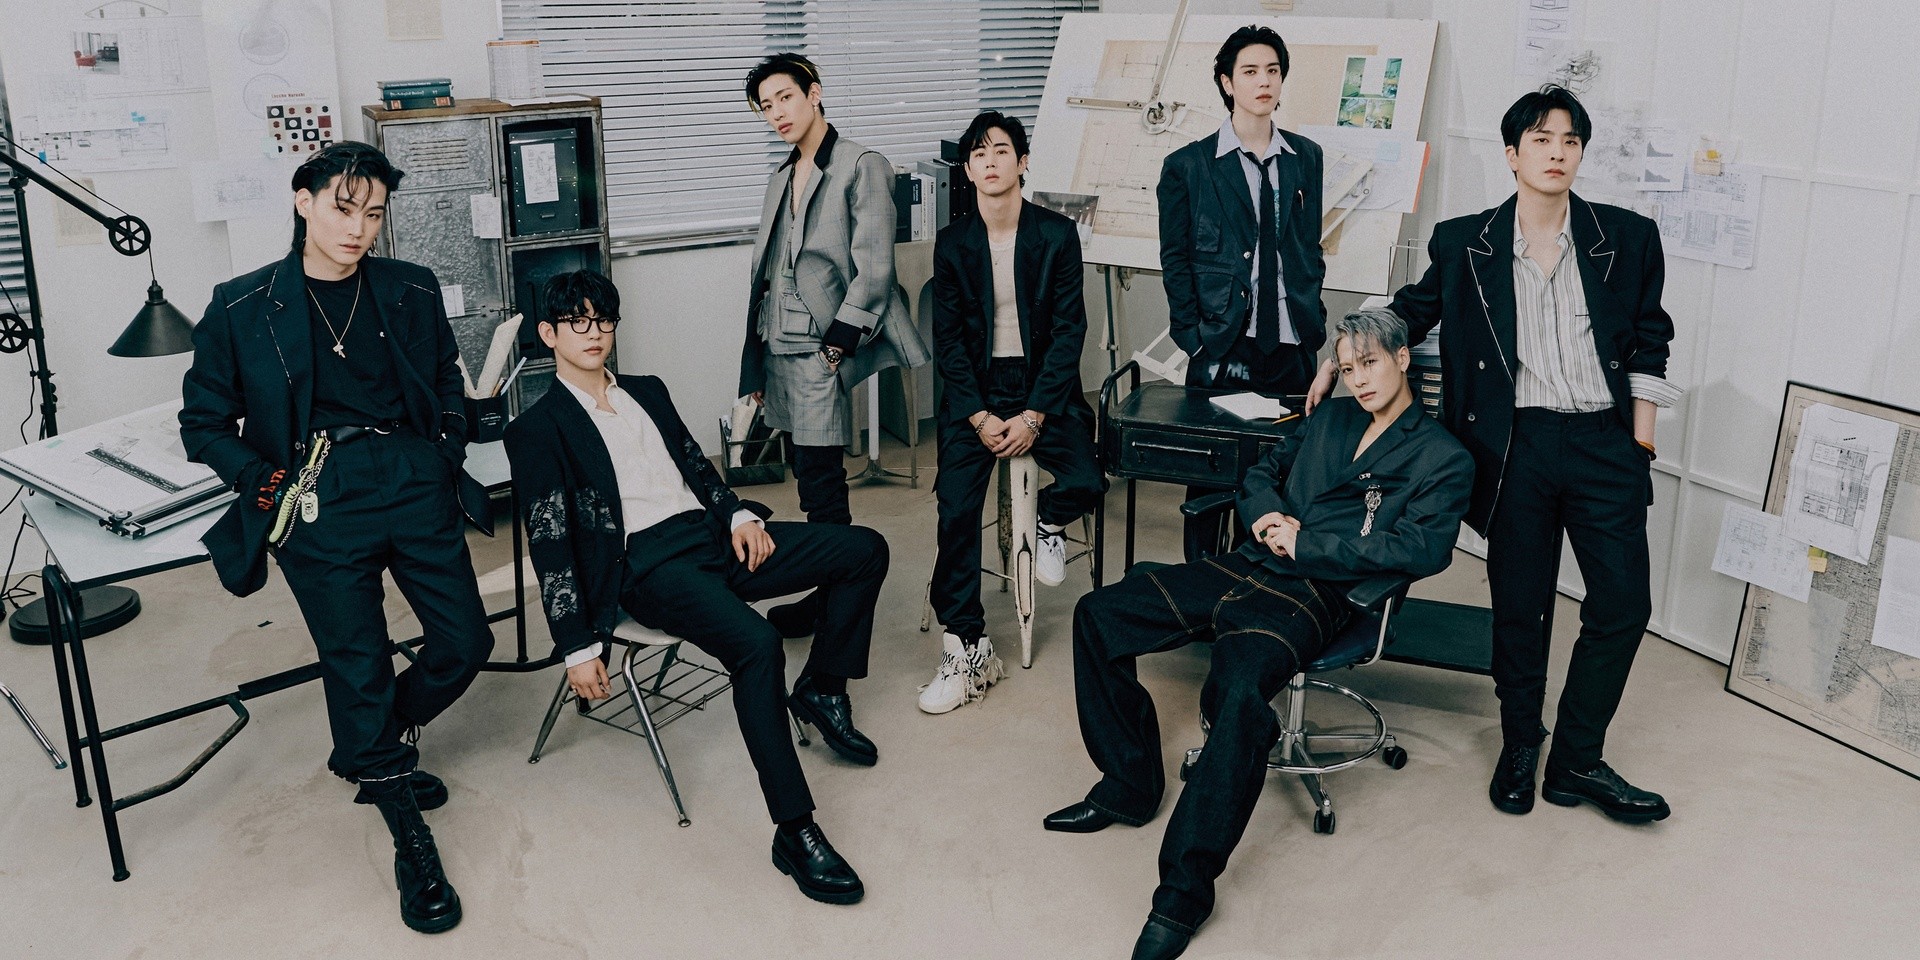 GOT7 reunite in self-titled EP: "This album is about not forgetting where we came from" — listen